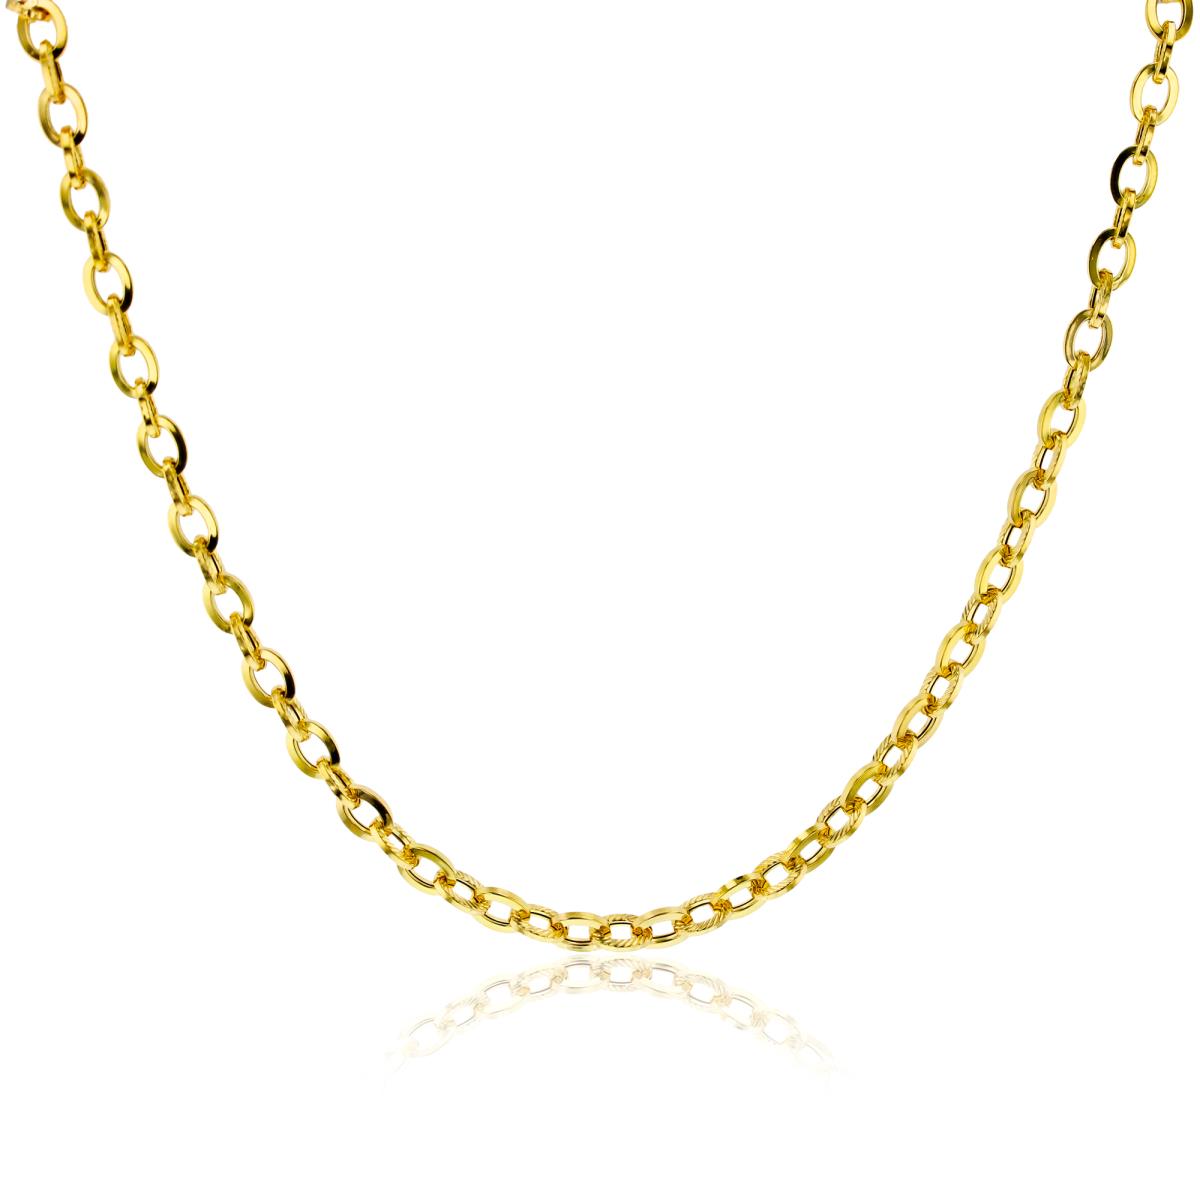 14K Yellow Gold Alternate Polished & Textured Open Oval Linked Italian 18"Necklace